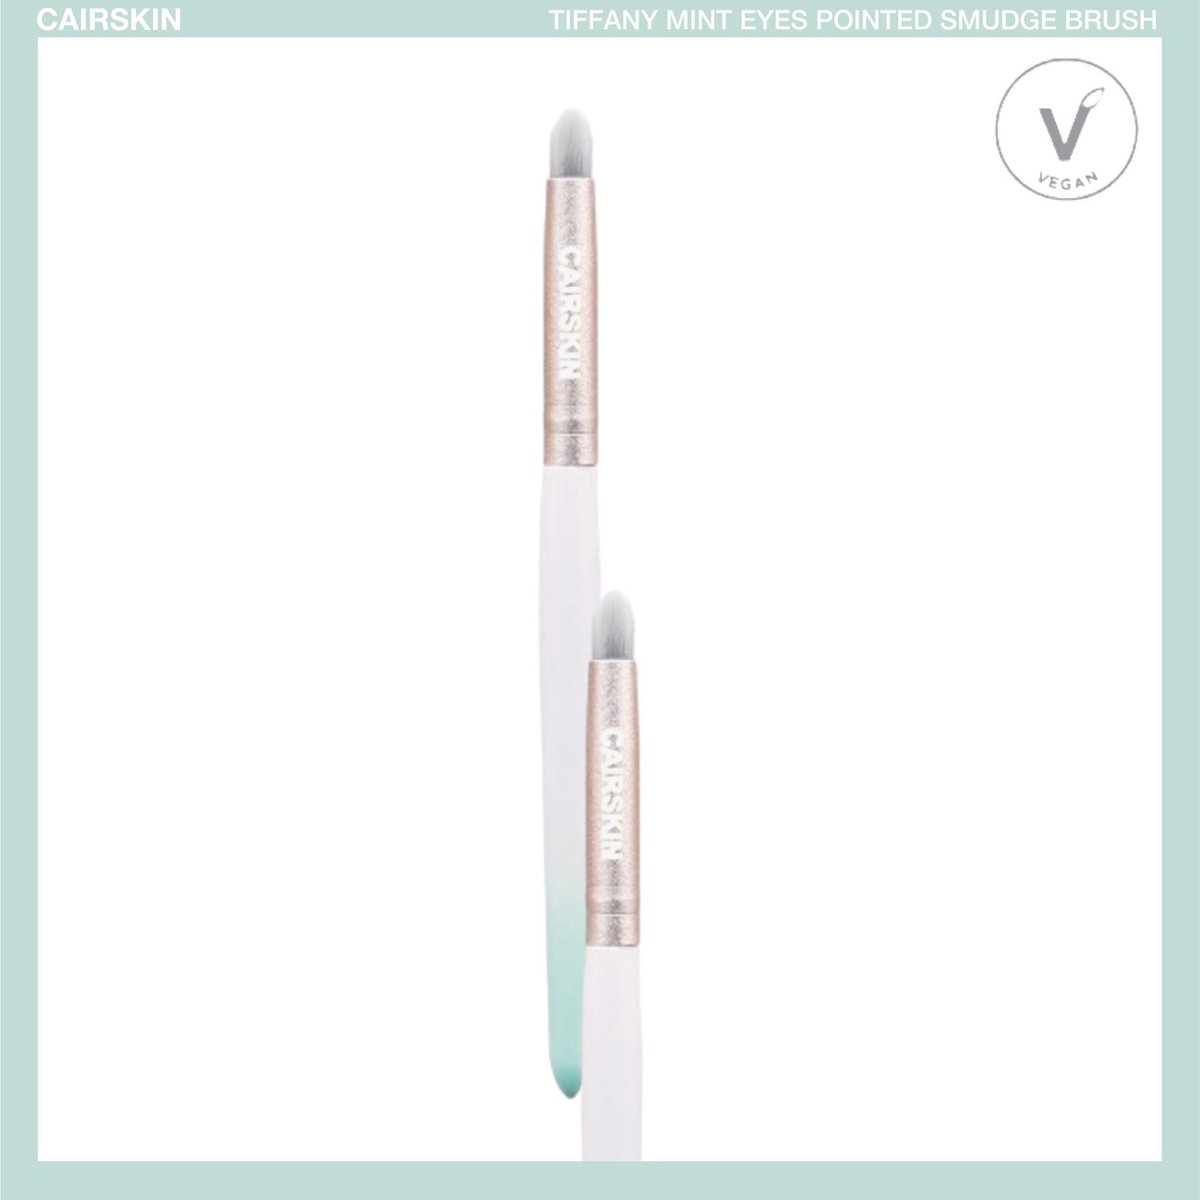 CAIRSKIN Tiffany Mint Pointed Smudge Brush - Eyes - CAIRSKIN